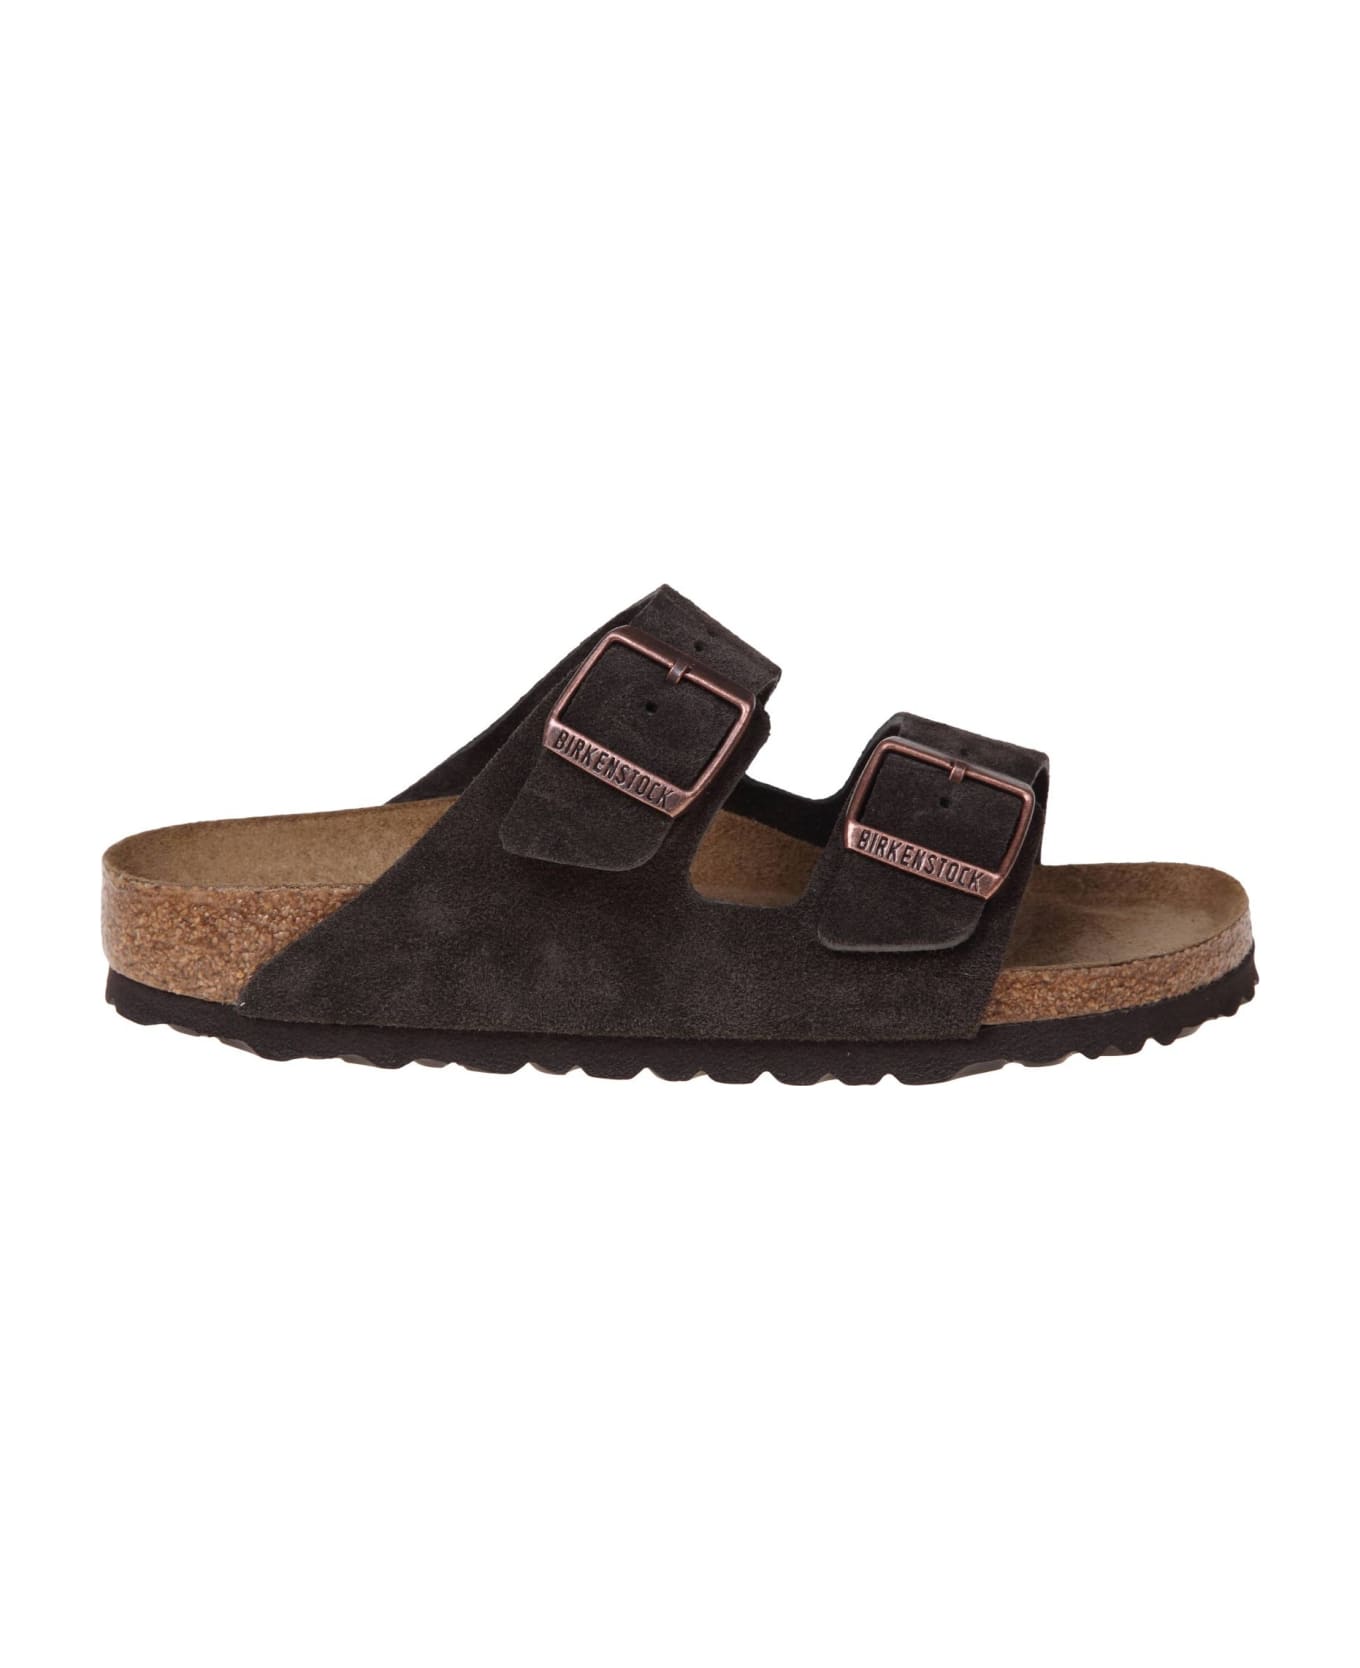 Birkenstock Arizona Sfb Oiled In Mocca Suede Leather その他各種シューズ